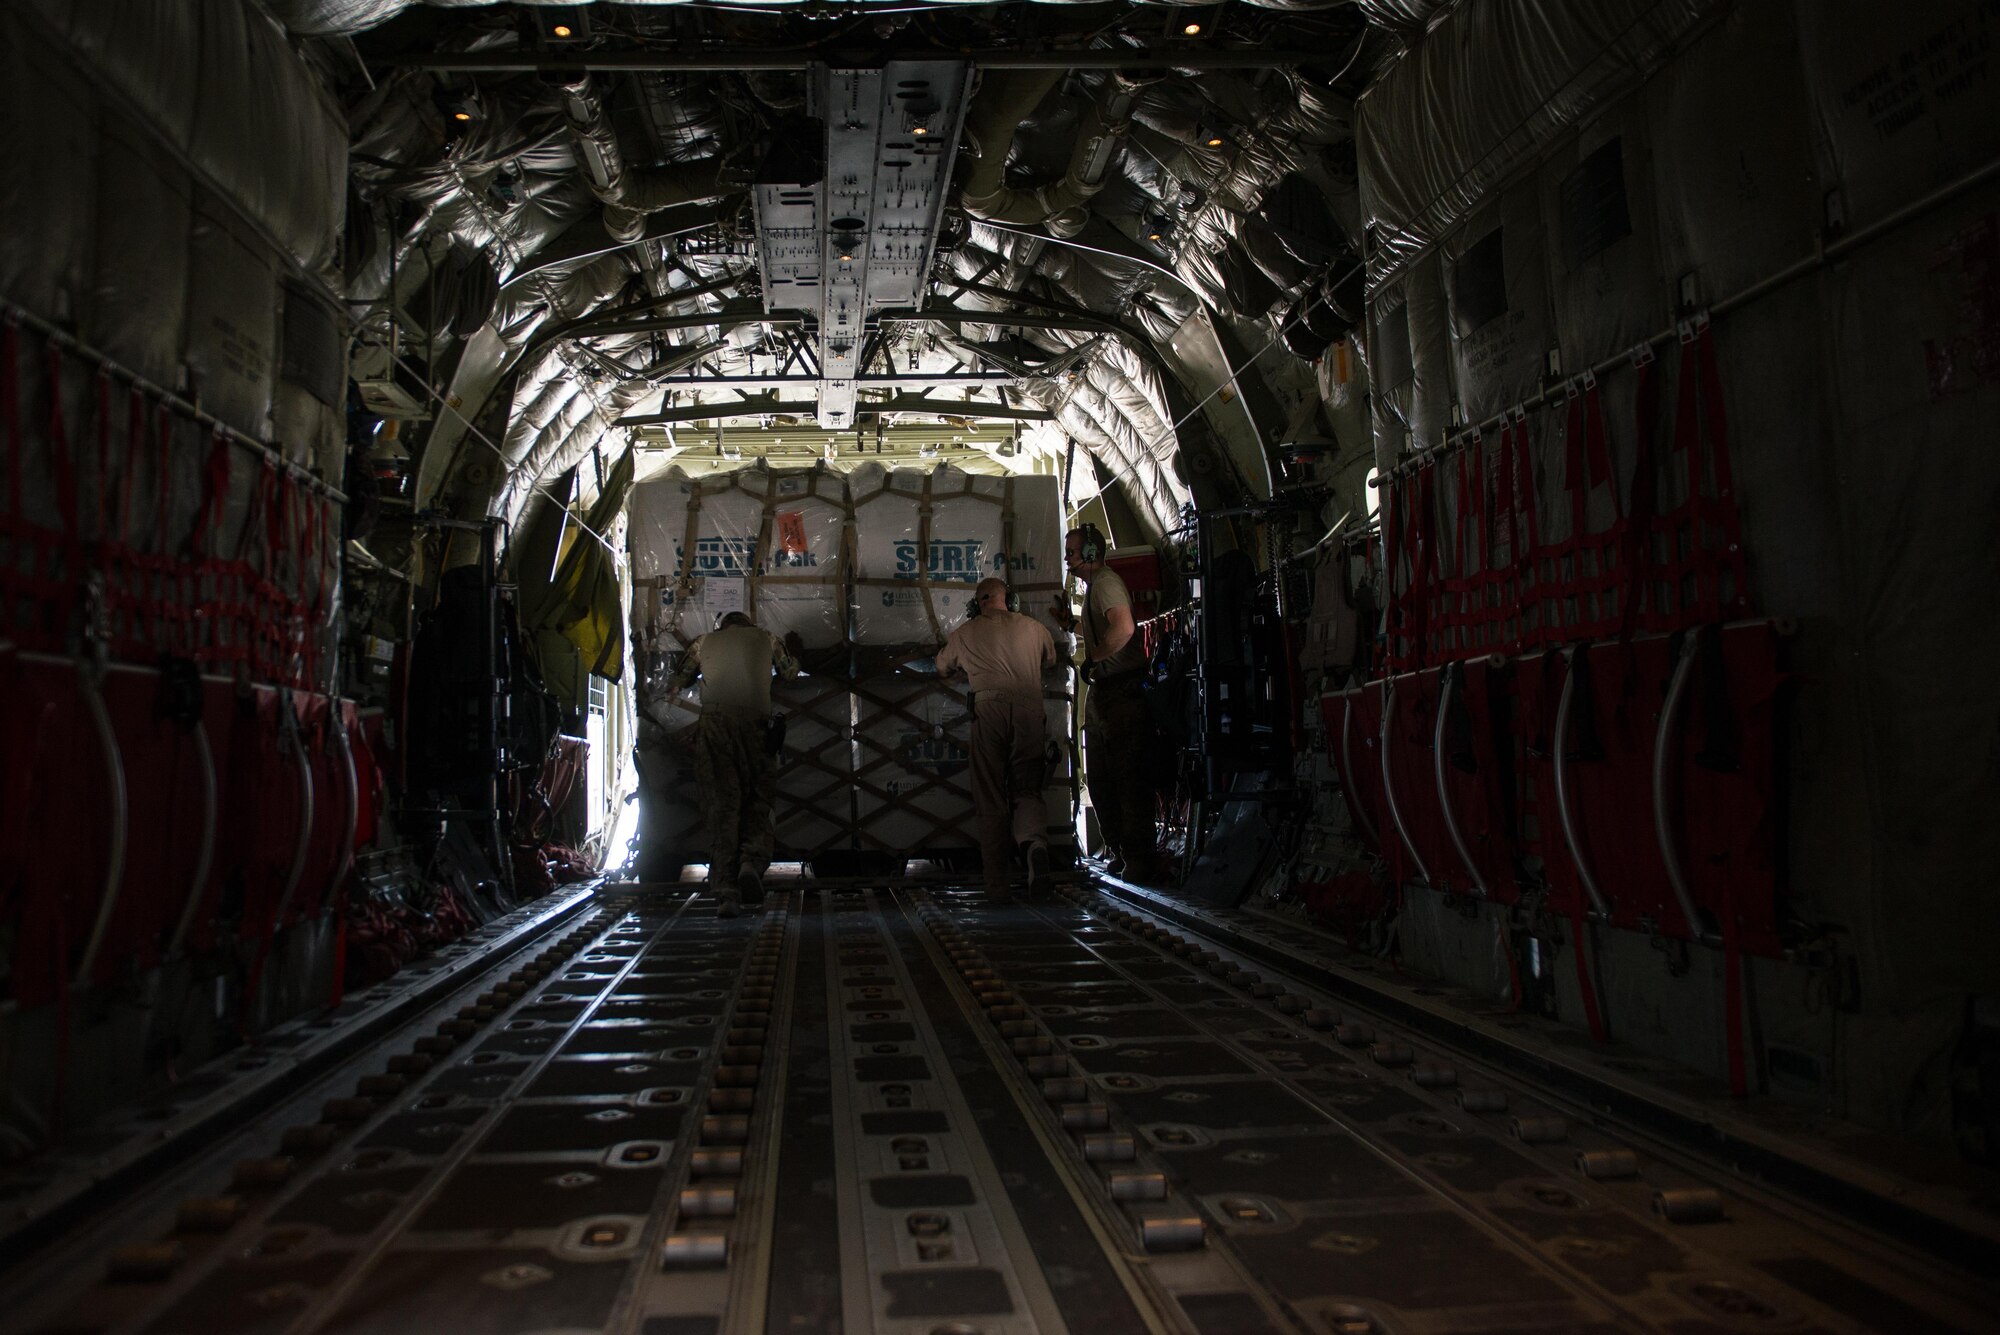 U.S. Airmen assigned to the 455th Air Expeditionary Wing unload cargo from an Air Force C-130J Super Hercules aircraft at Camp Dwyer, Afghanistan, Aug. 27, 2015. The aircrafts short takeoff and landing capability makes it an optimum fit for Afghanistan’s rugged terrain. (U.S. Air Force photo by Tech. Sgt. Joseph Swafford/Released)